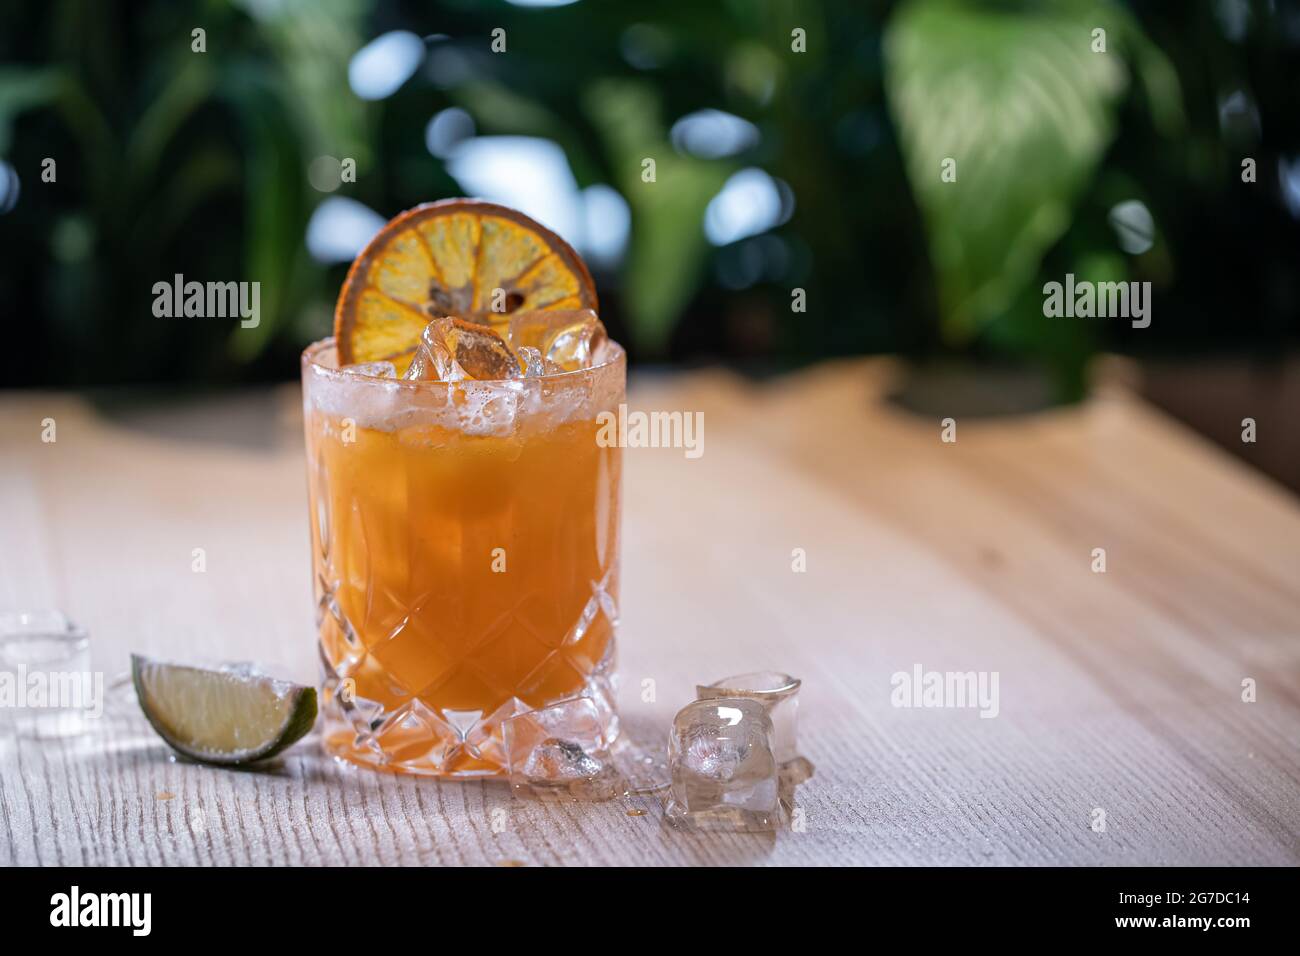 lemonade in glass or refreshing drink with orange juice, lime and ice on table Stock Photo